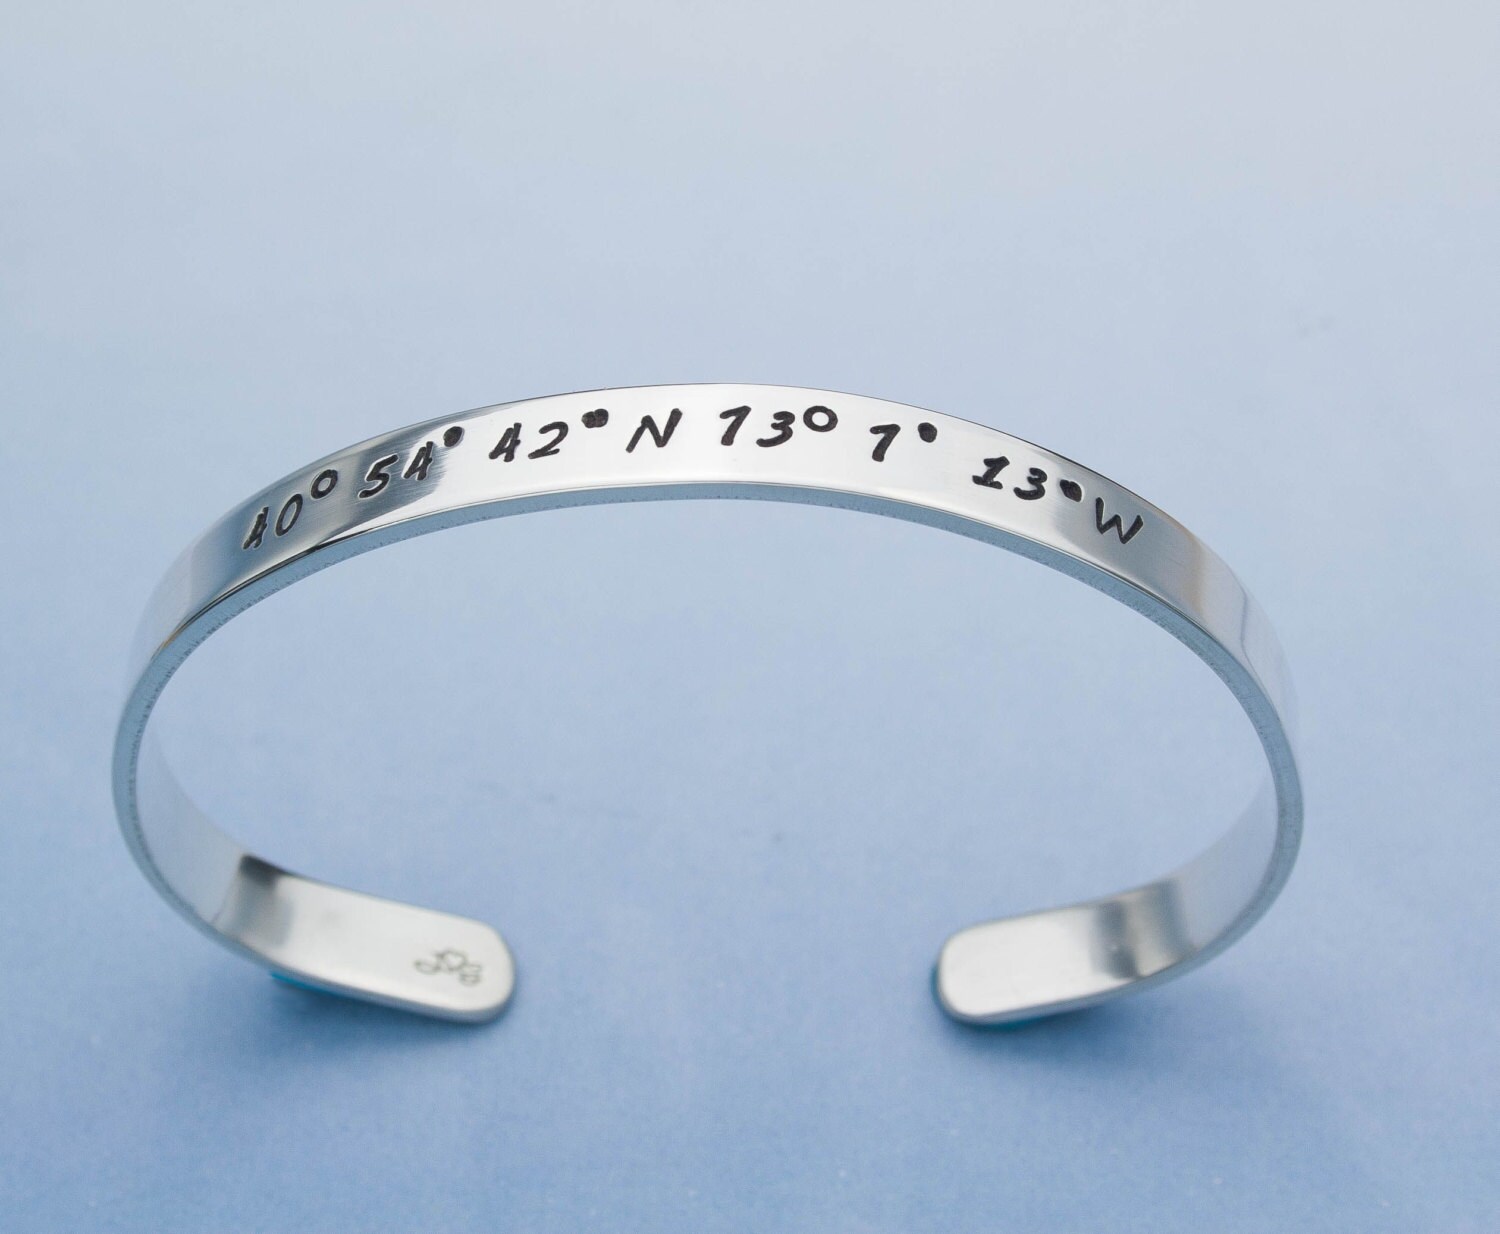 Coordinate Jewelry, Custom Coordinates Bracelet, Longitude Latitude Cuff Bracelet, GPS Coordinates Jewelry, Hand Stamped Sterling Silver